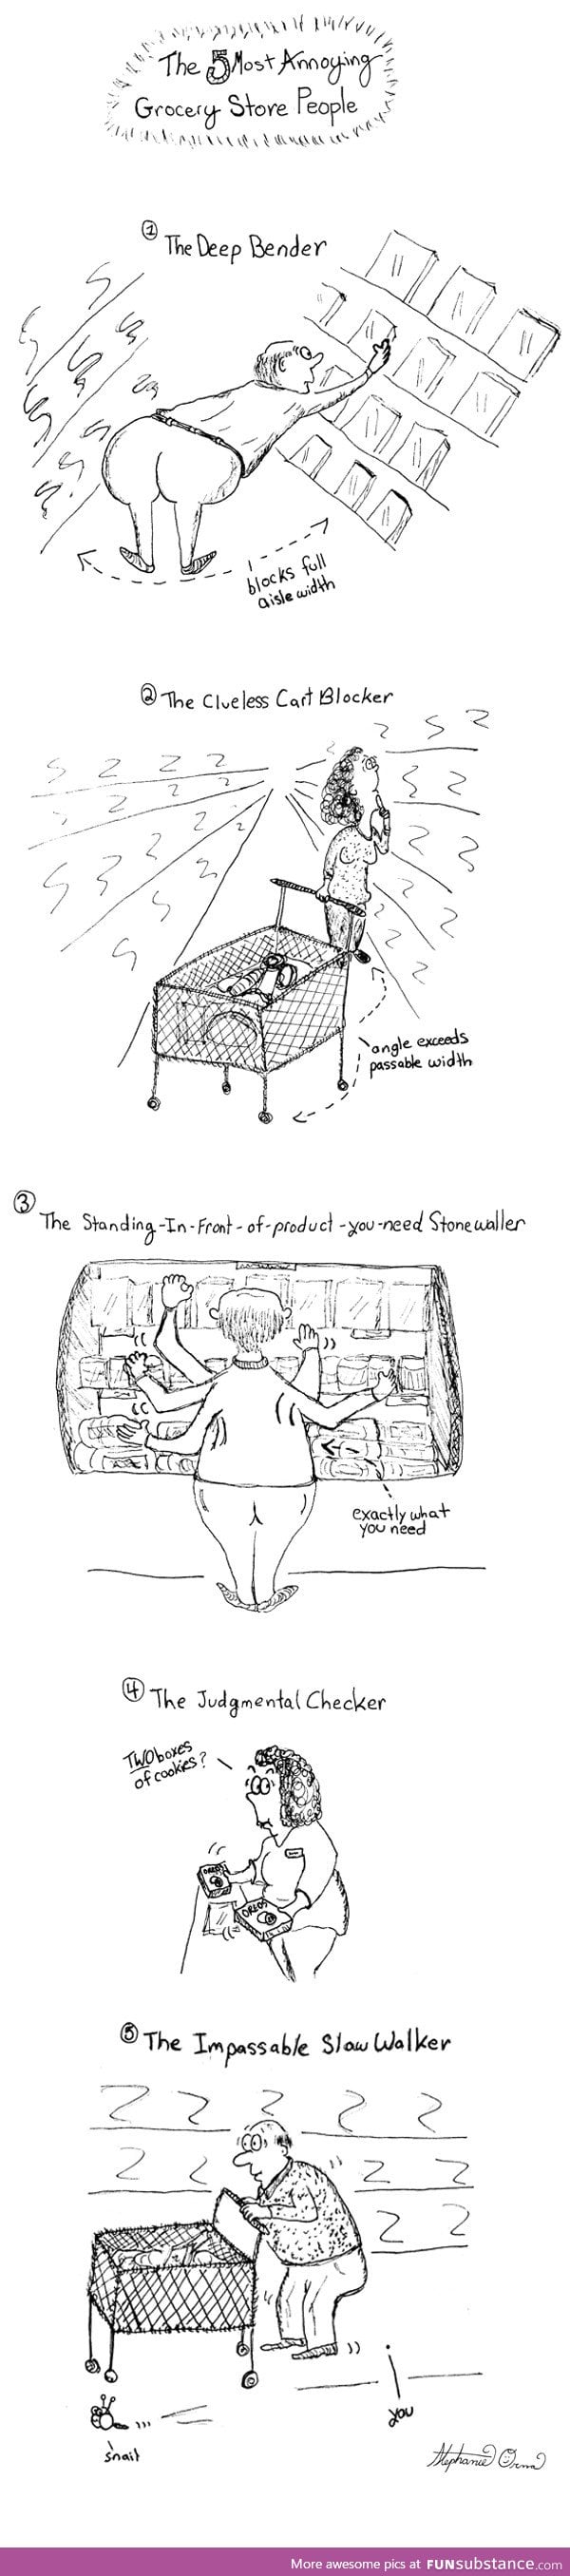 The 5 Most Annoying People At the Grocery Store by Stephanie Orma